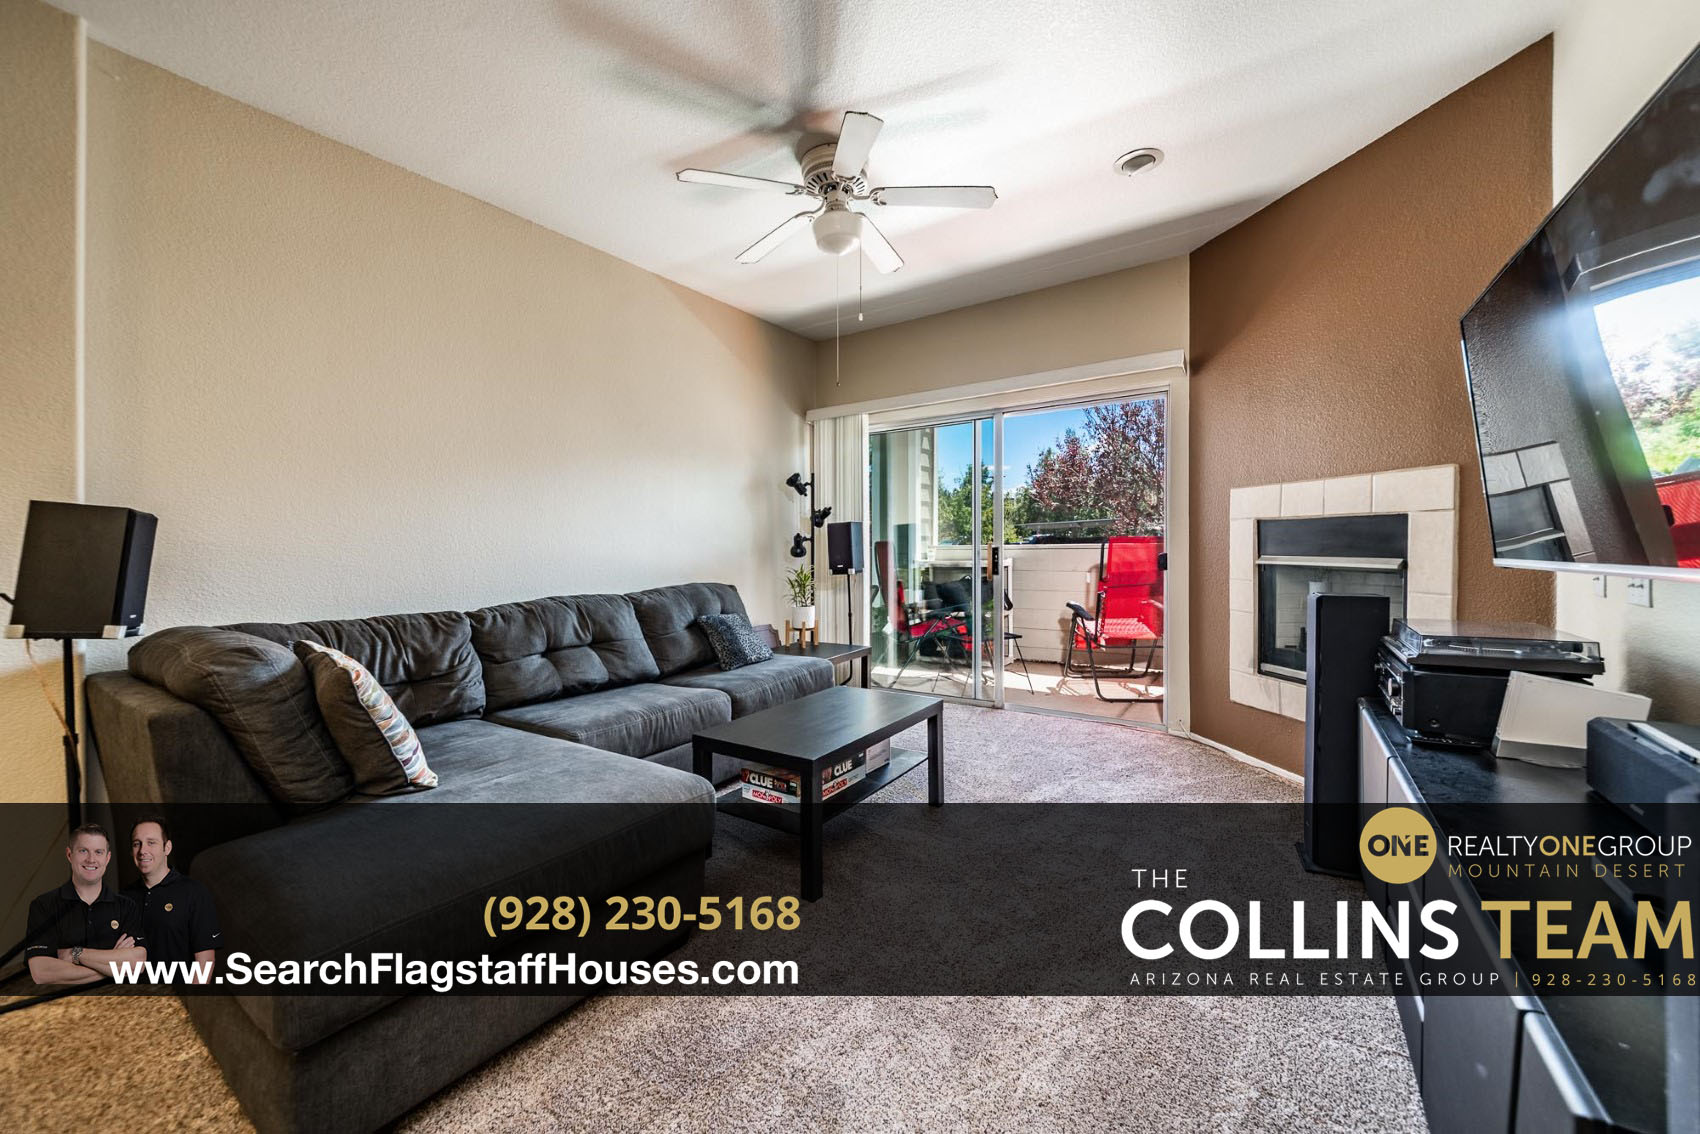 Timberline Place Condo in Flagstaff - 4343 E Soliere Ave Unit 1092